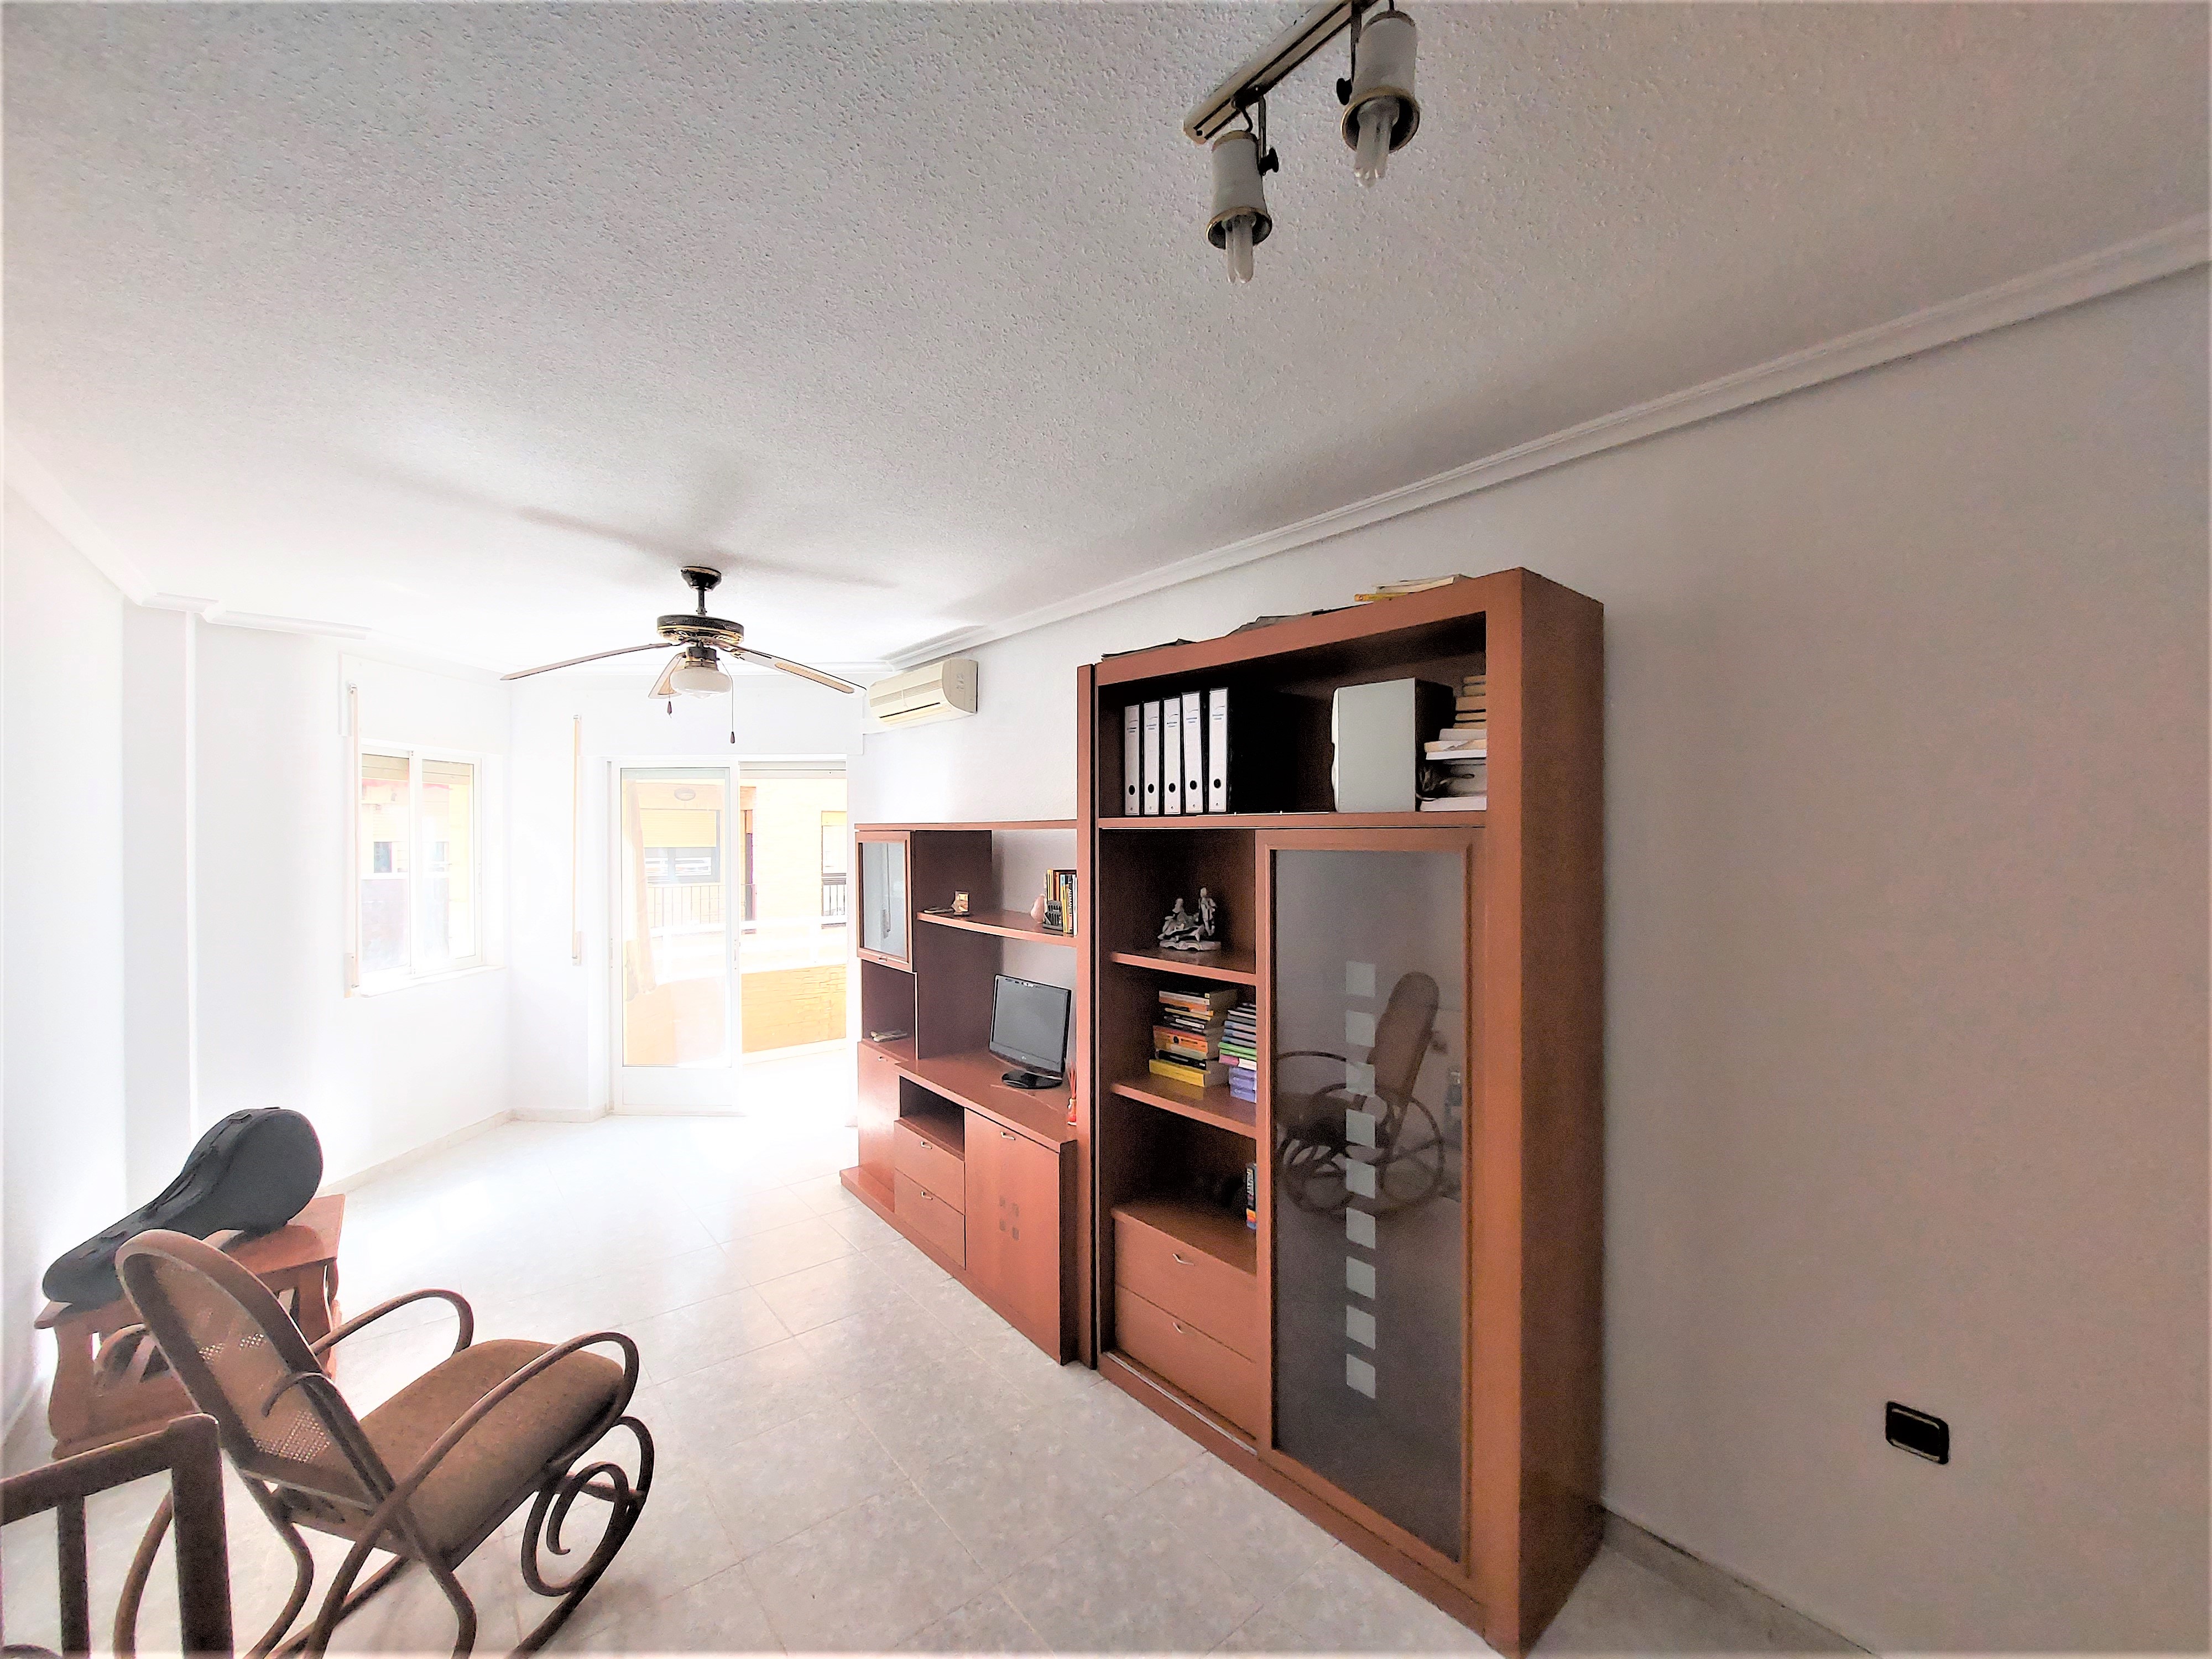 Property Image 486047-torrevieja-apartment-3-2